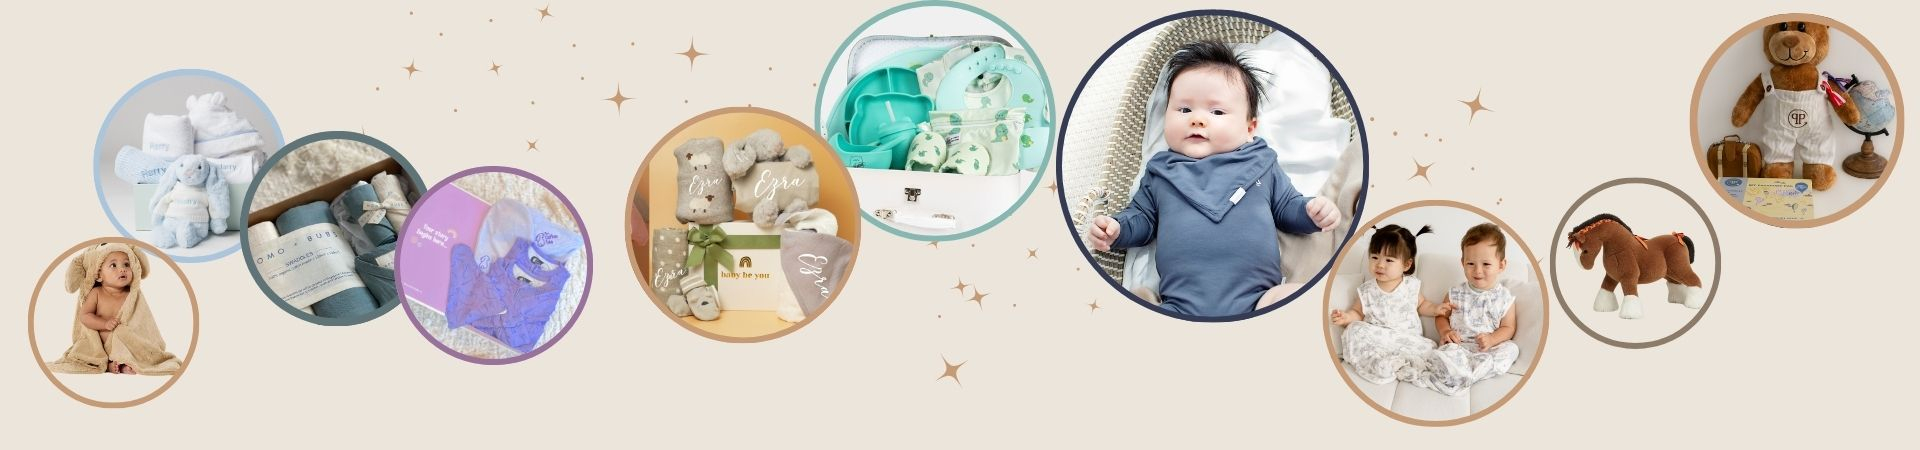 singapore baby gifts